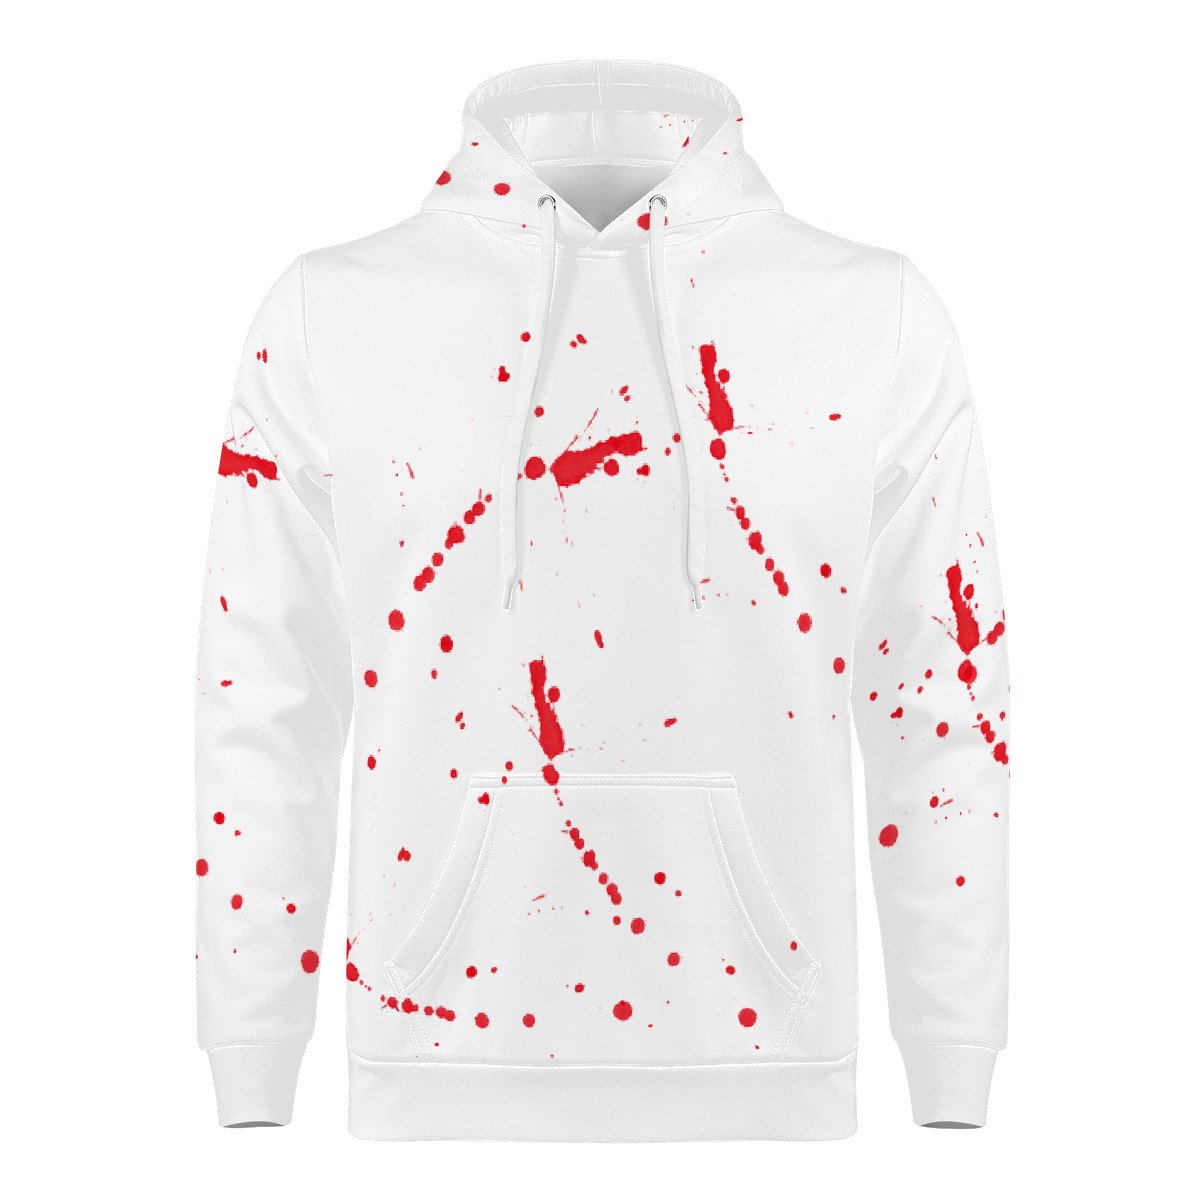 Fred Jo Blooded Hoodie - Fred jo Clothing